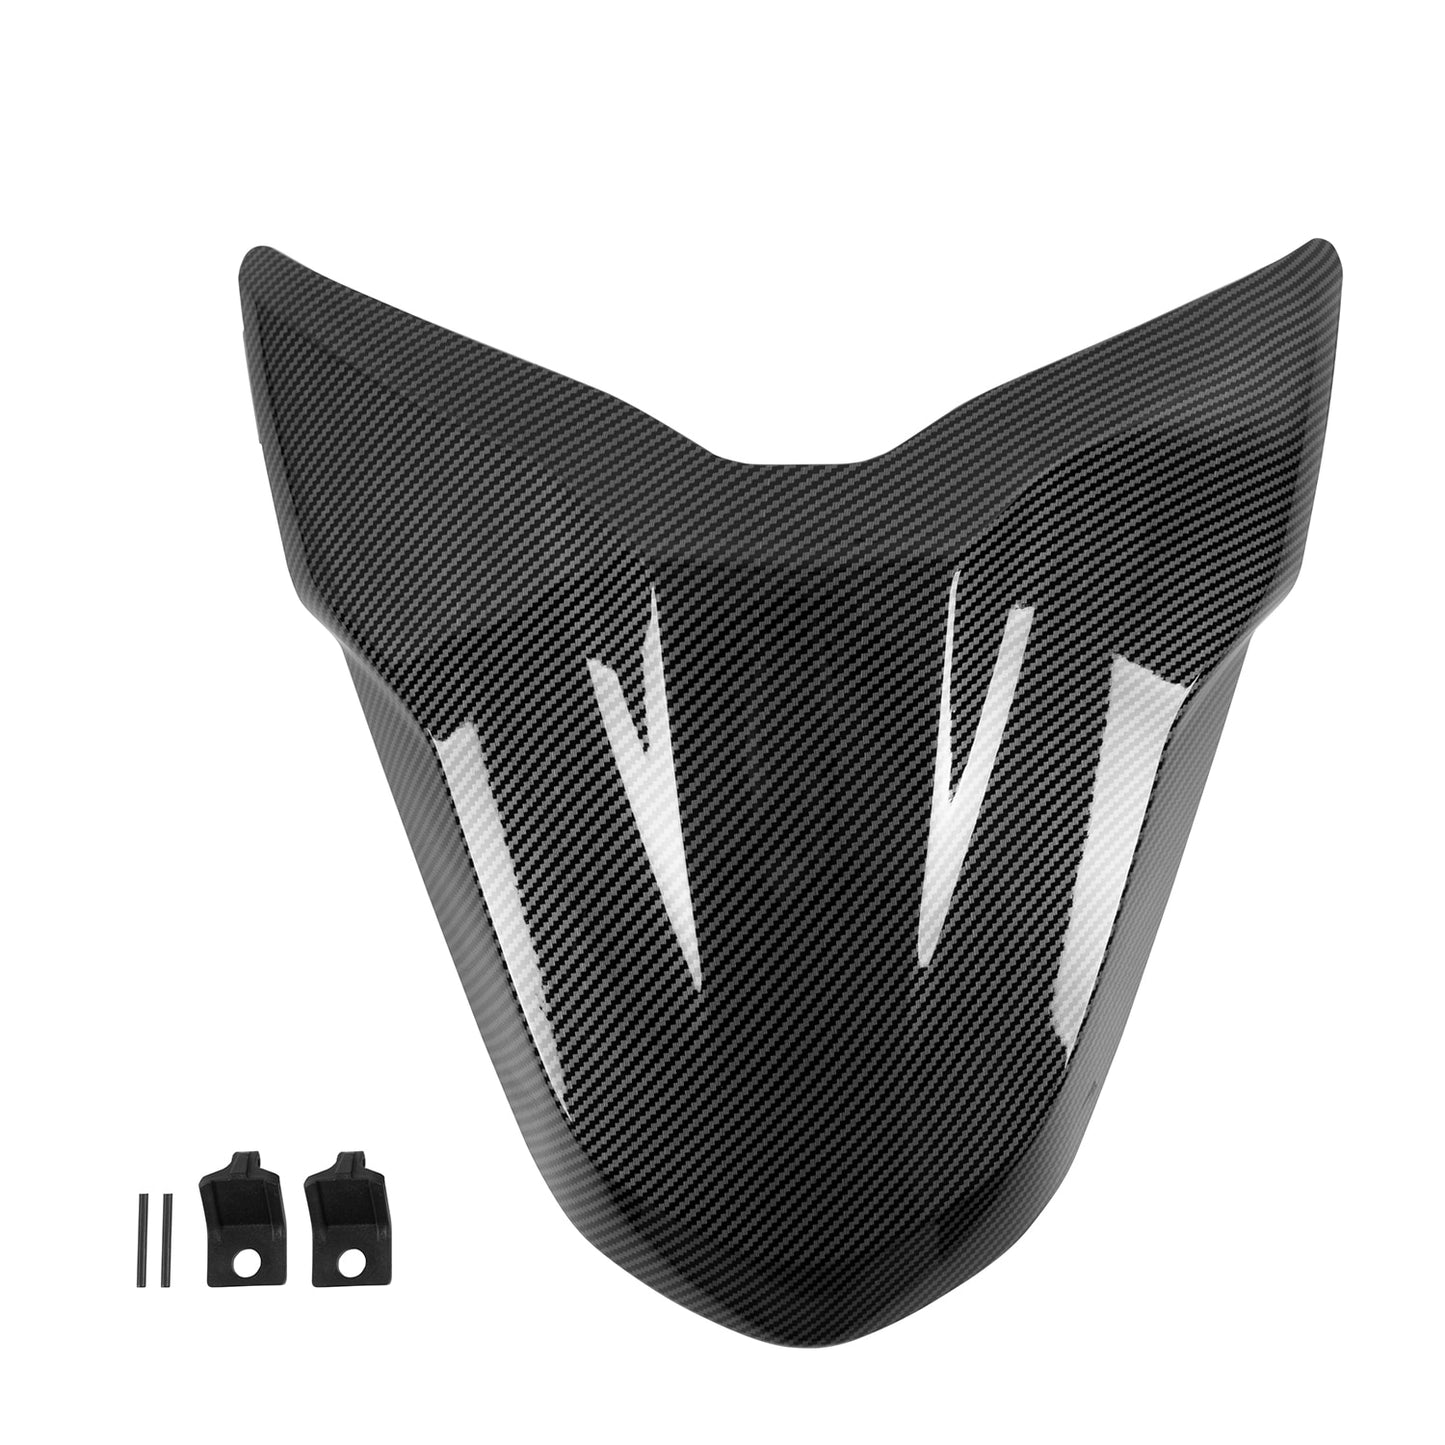 Motorcycle Seat Cover Rear Passenger Cowl Hump Fairing Pillion Solo For DUCATI Supersport 939 950 Super Sport S All year Seal